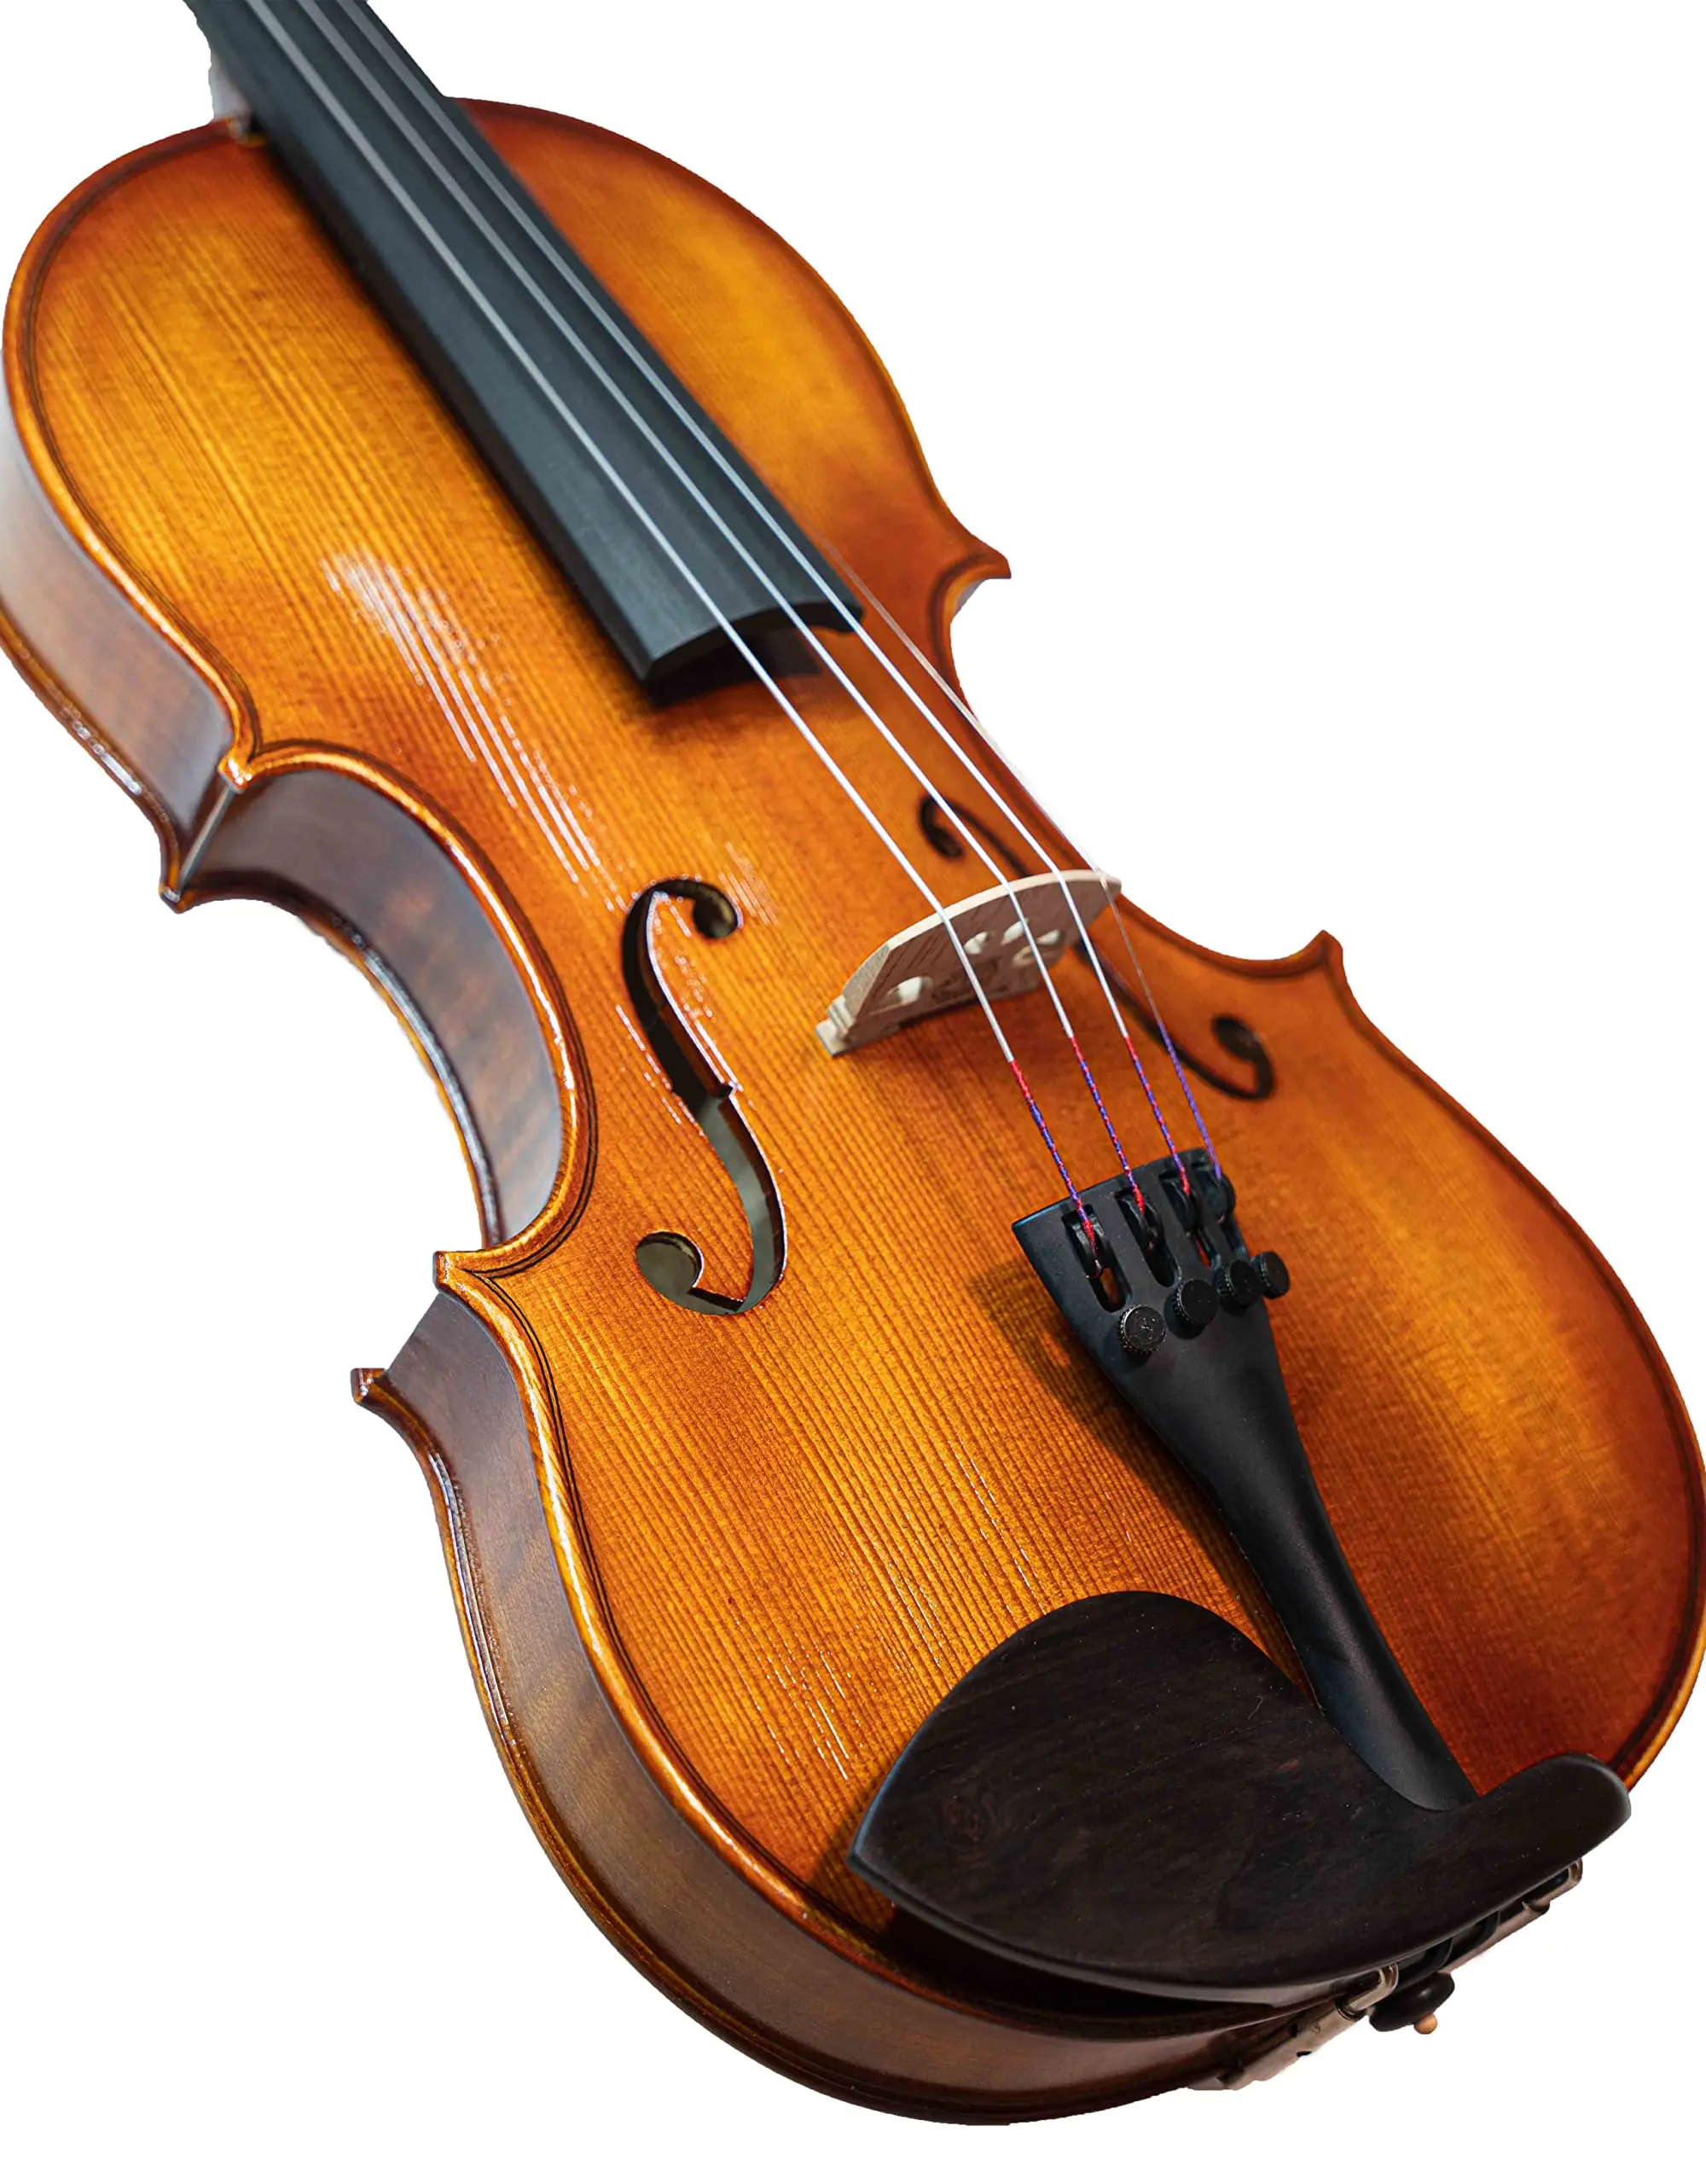 hard maple violines de - What is the difference between hard maple and curly maple